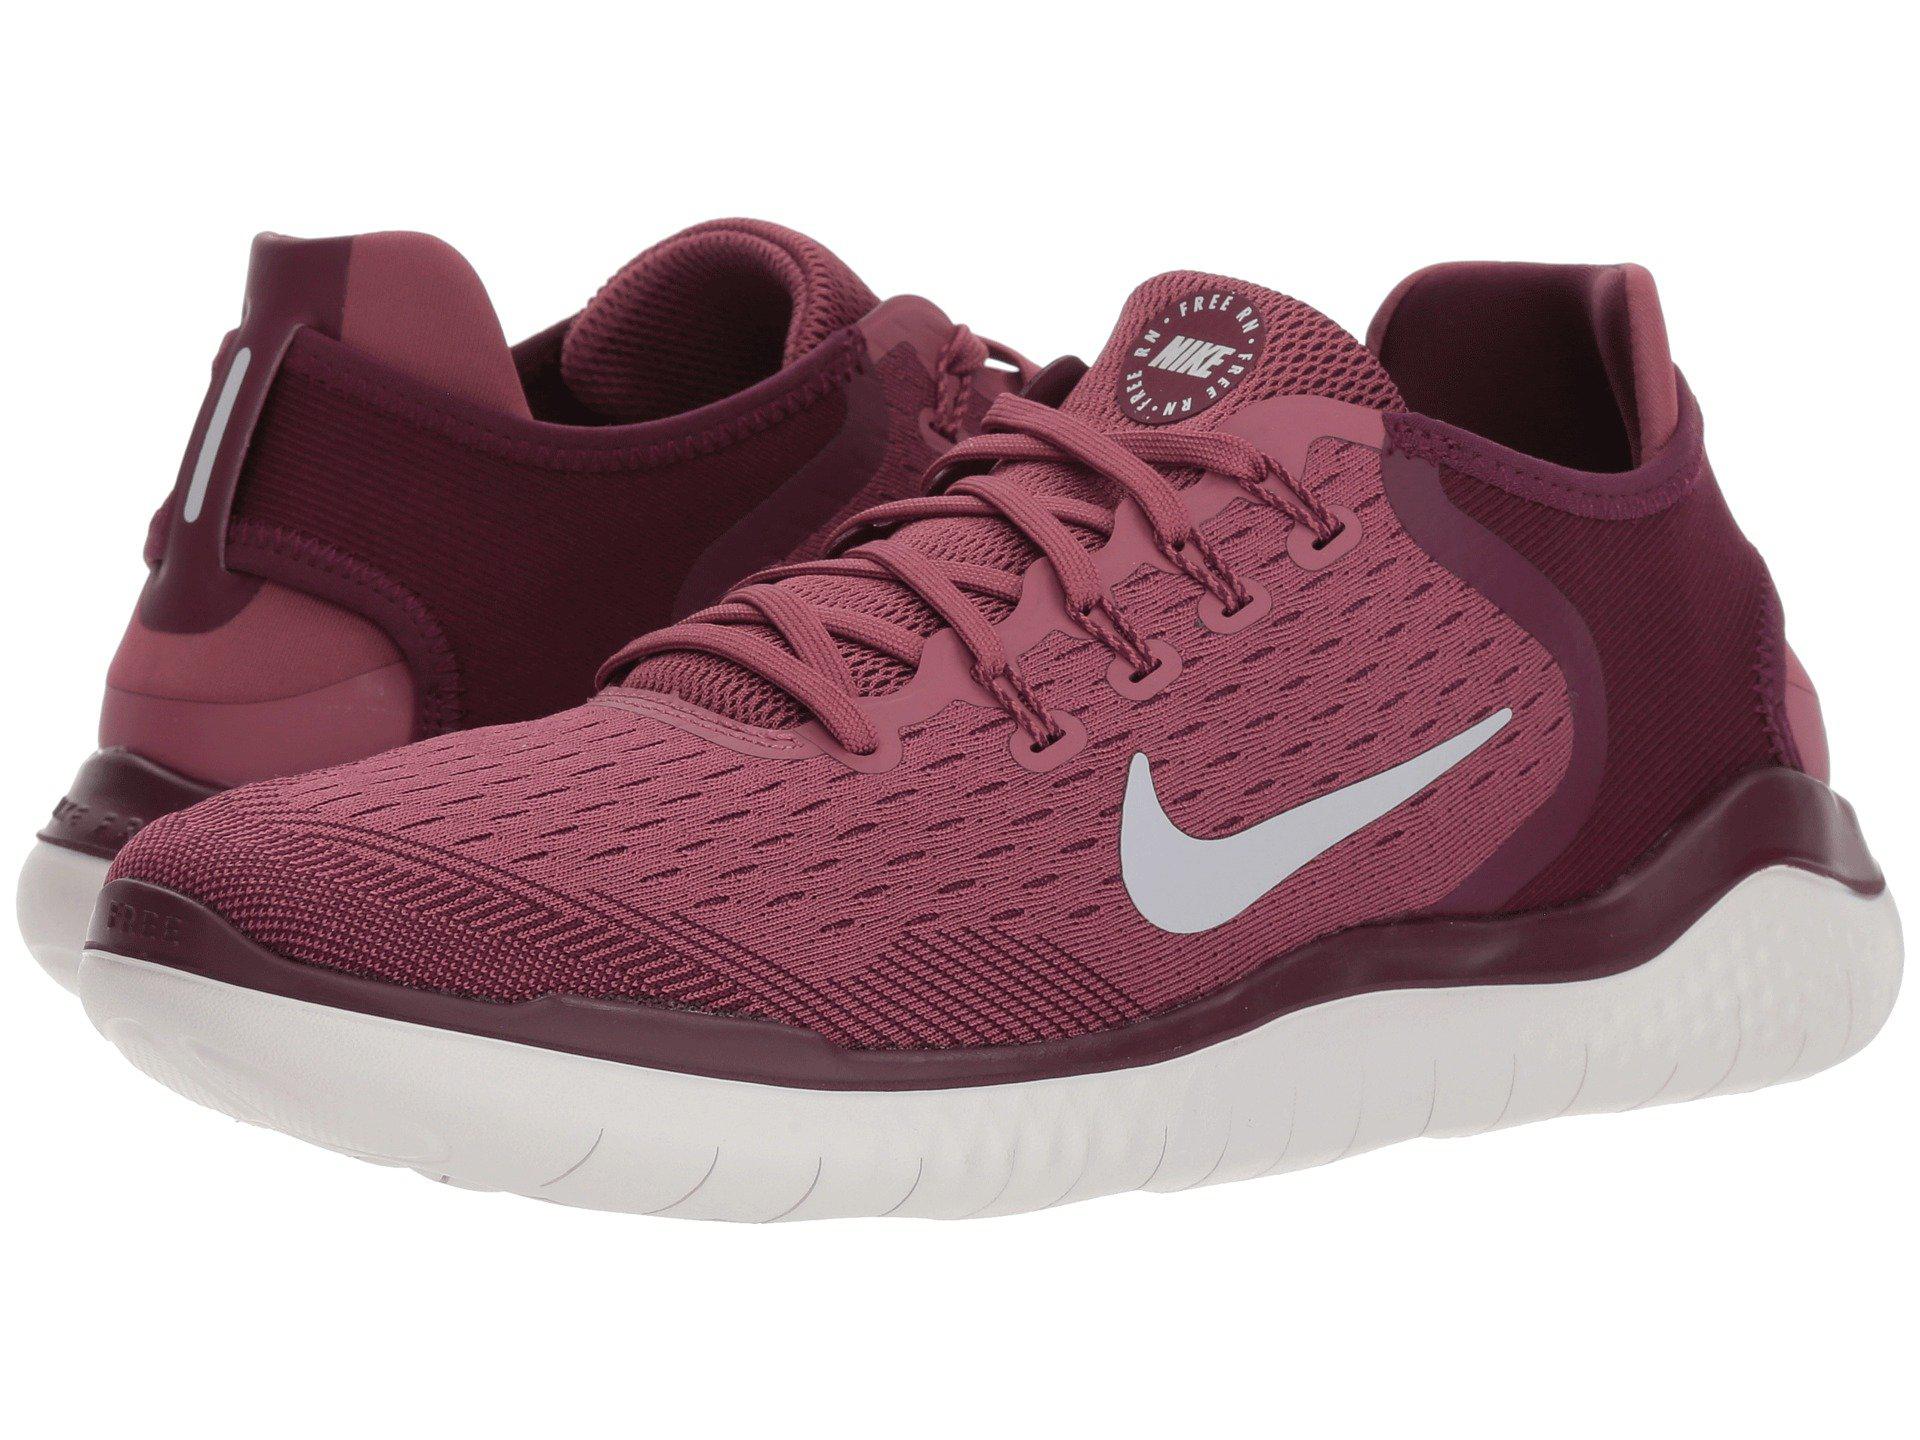 Nike Synthetic Free Rn 2018 (bordeaux/wolf Grey/vintage Wine) Running Shoes  for Men - Lyst